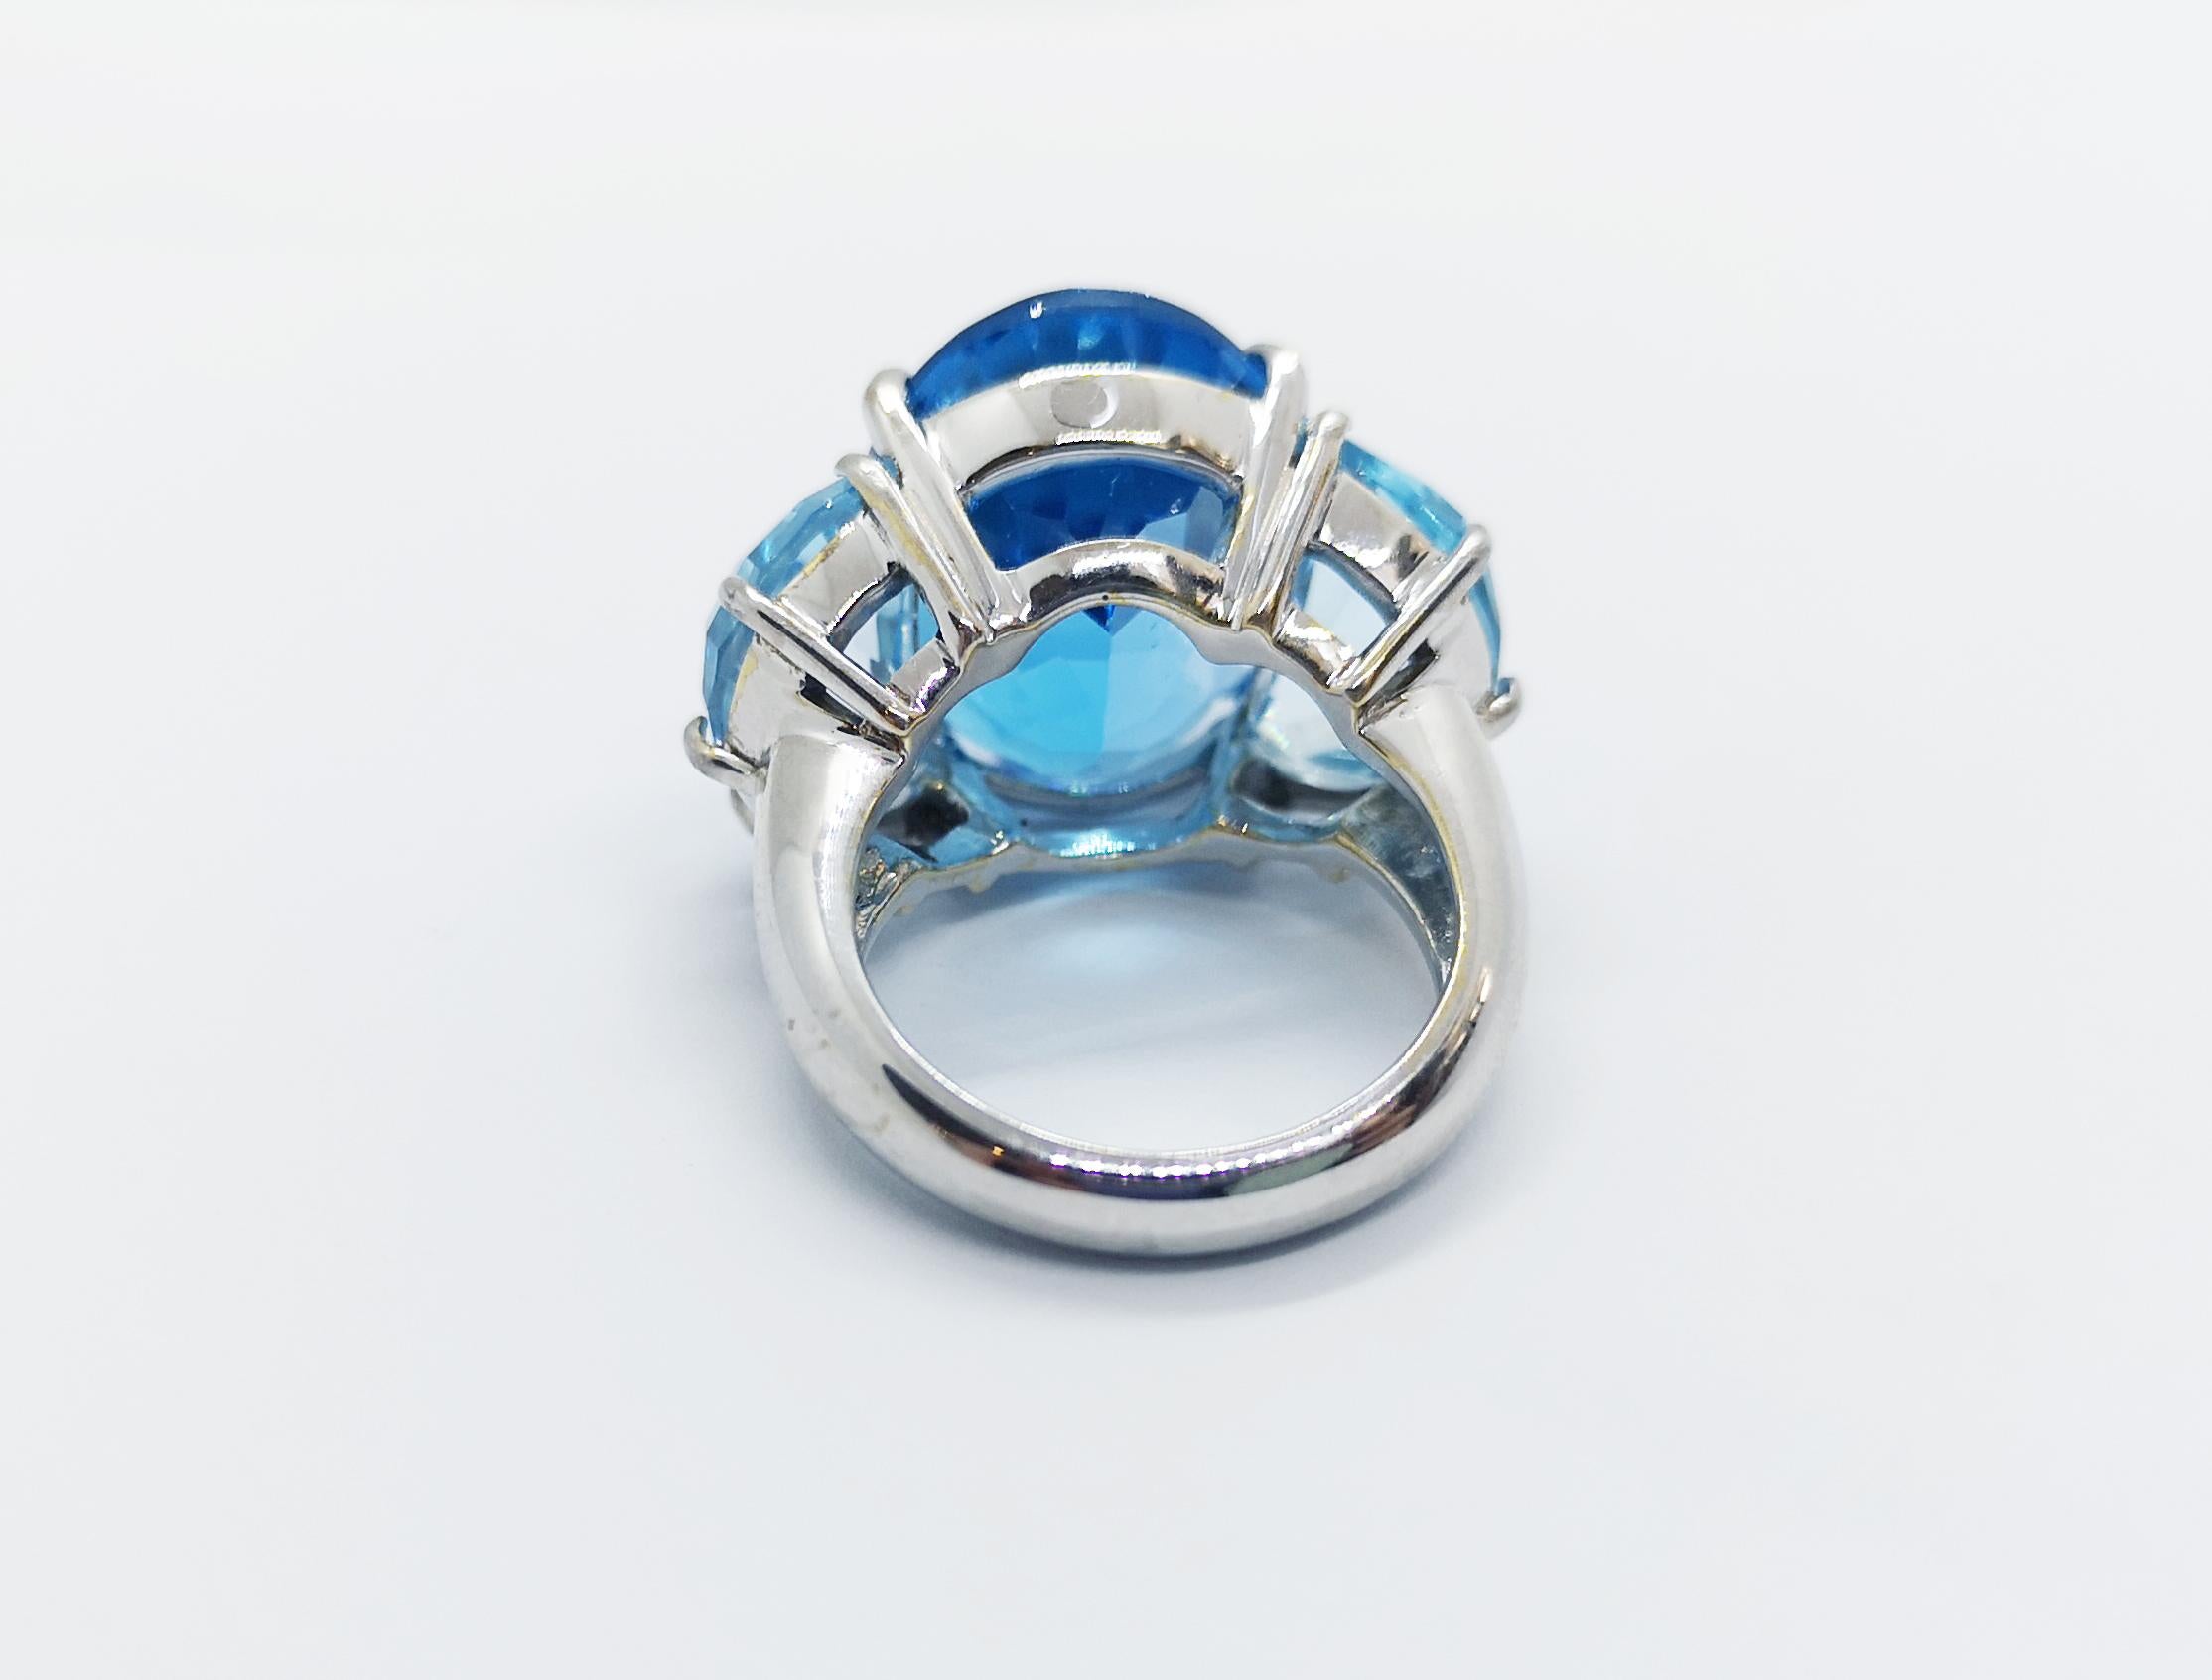 Blue Topaz 23.75 carats with Blue Topaz 10.12 carats Ring set in 18 Karat White Gold Settings 

Width: 2.7 cm
Length: 2.0 cm 
Ring Size: 54

